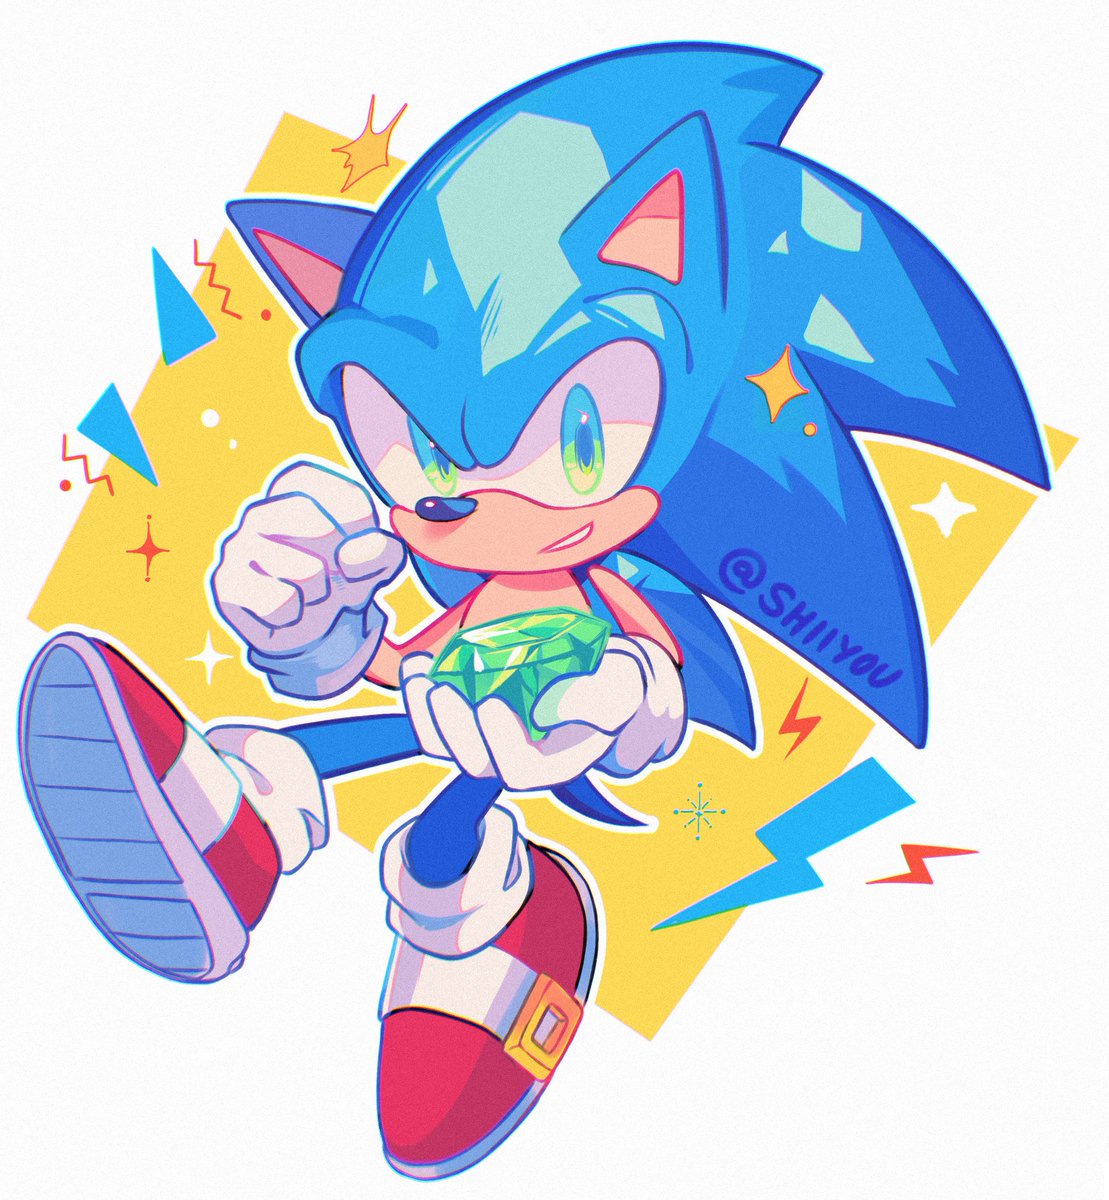 New stickers coming soon :>
-
#SonicArt